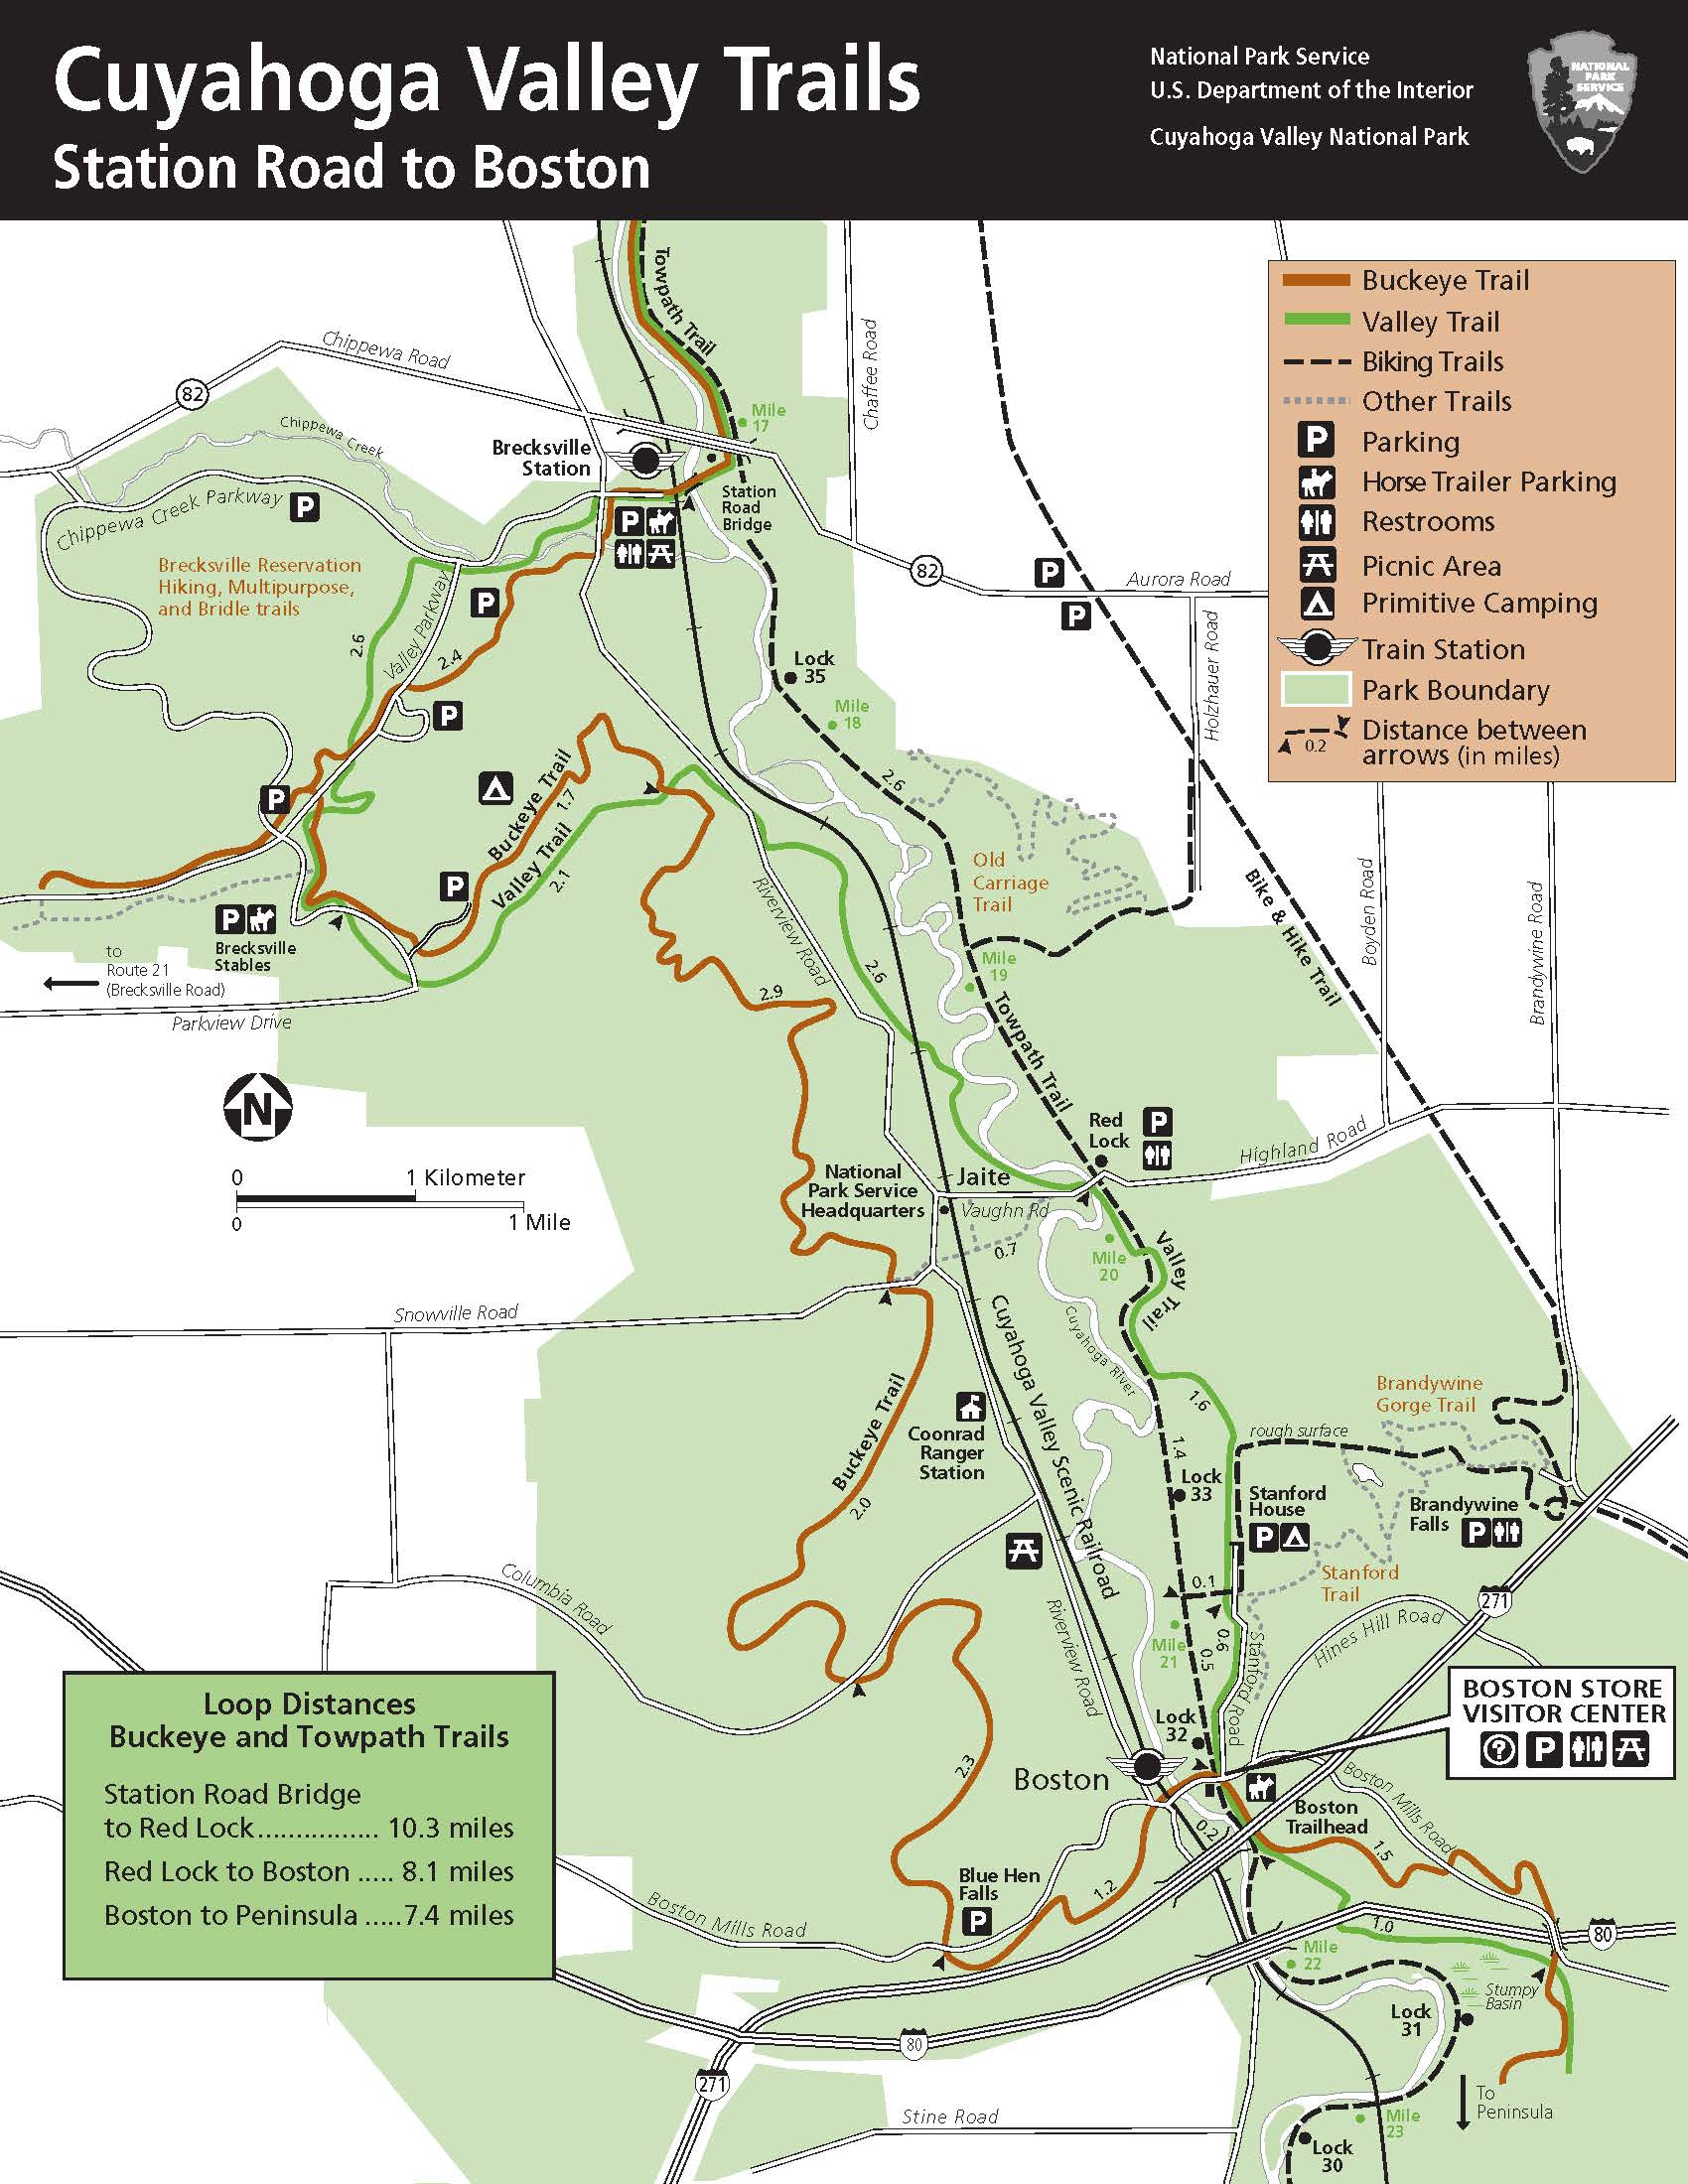 Map Of Cuyahoga Valley Trails From Boston To Everett. - Map of Cuyahoga Valley Trails from Boston to Everett.